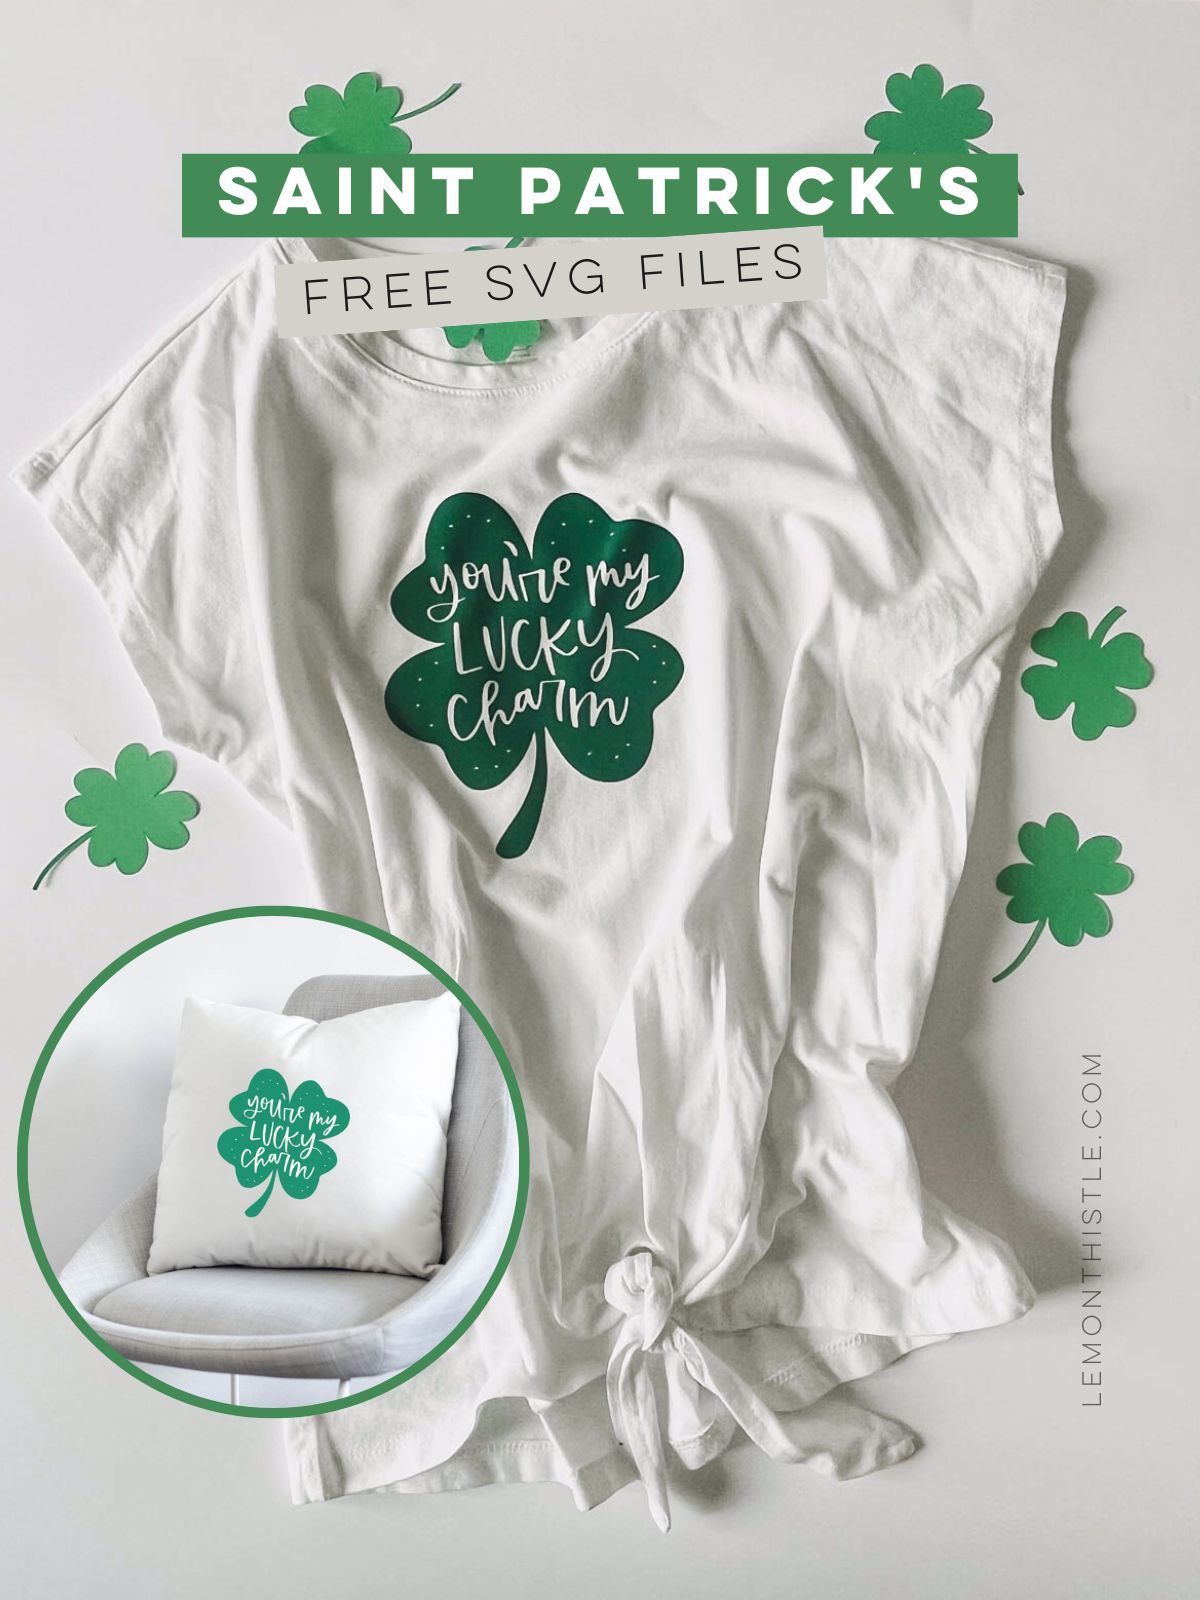 'you're my lucky charm' hand lettered on a shamrock ironed on to a t-shirt and pillow with text over that reads 'saint patrick's day free SVG files'